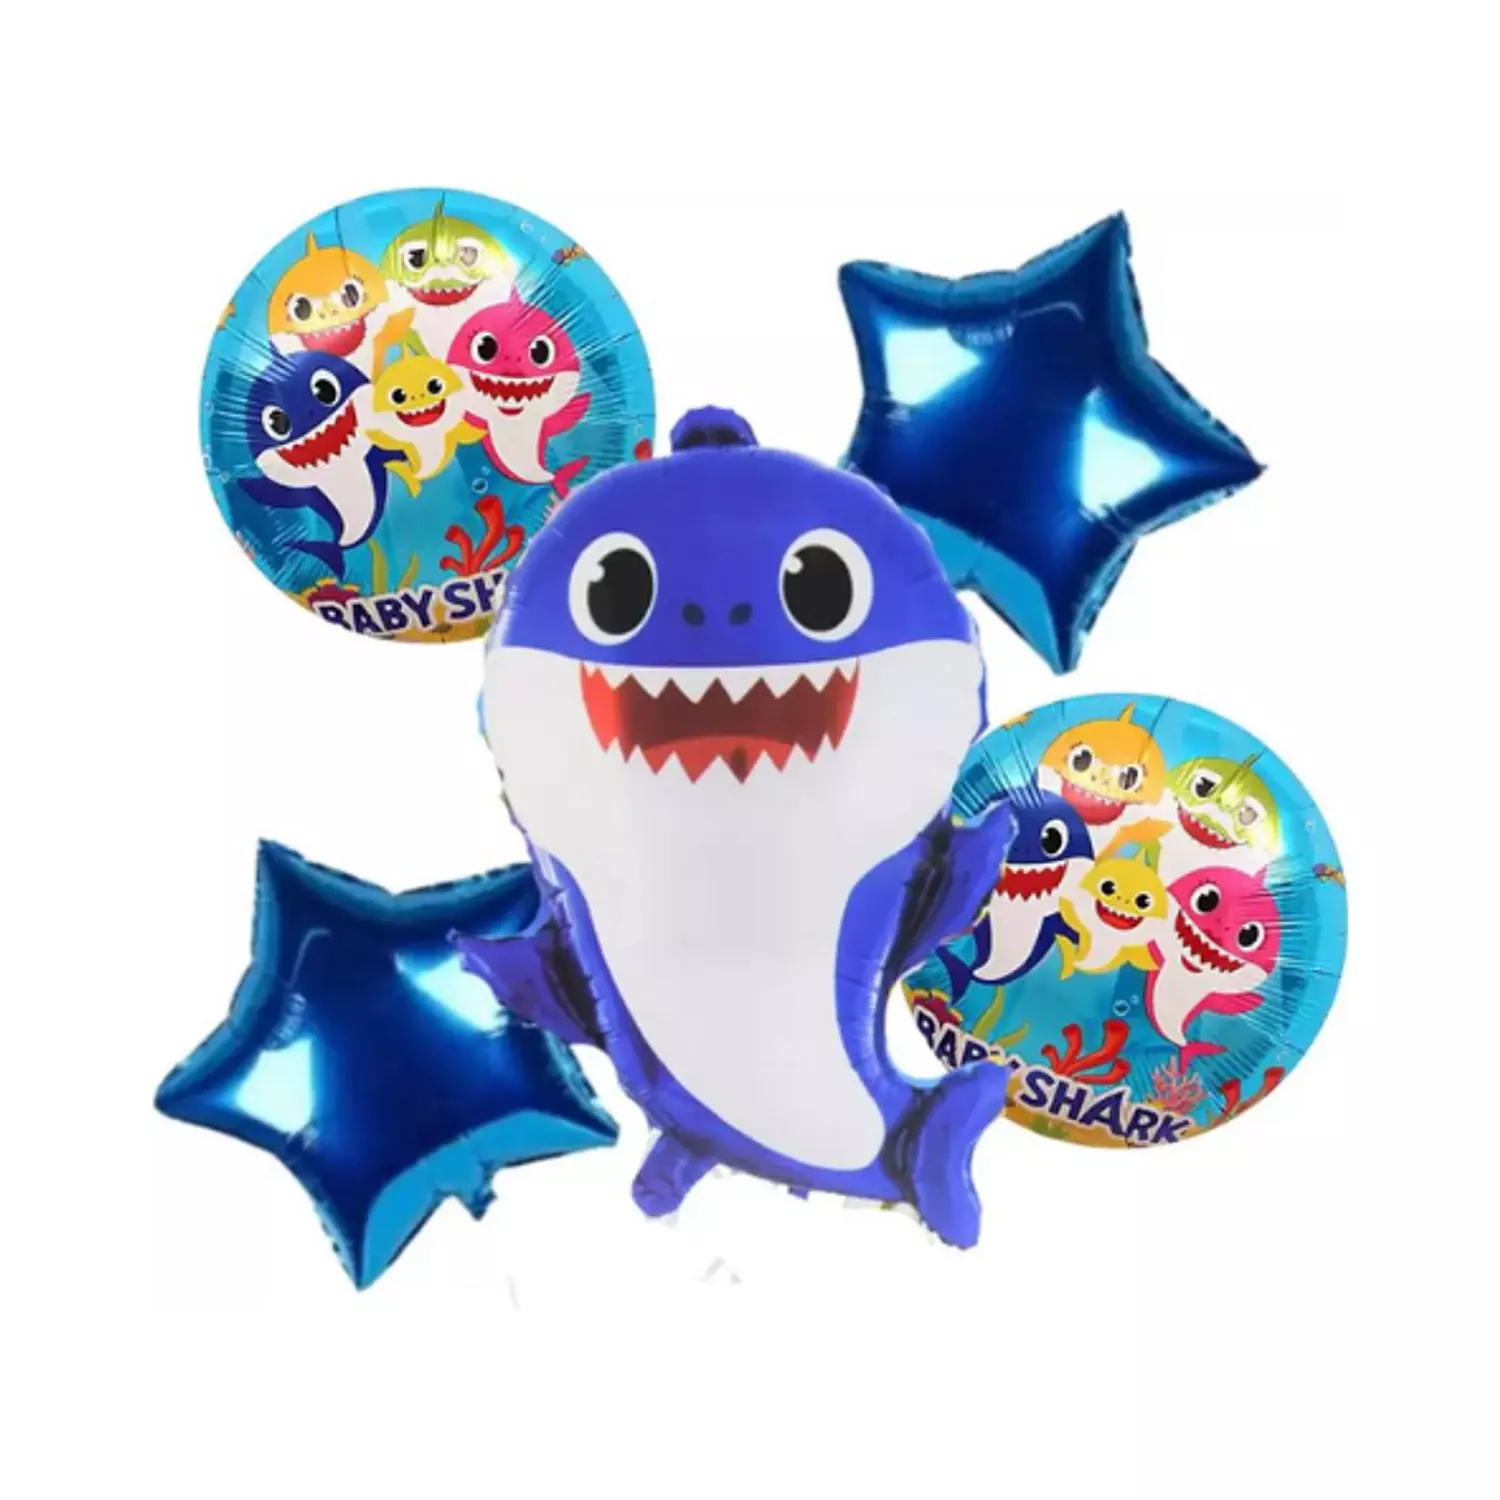 Baby Shark Balloon Collection hover image